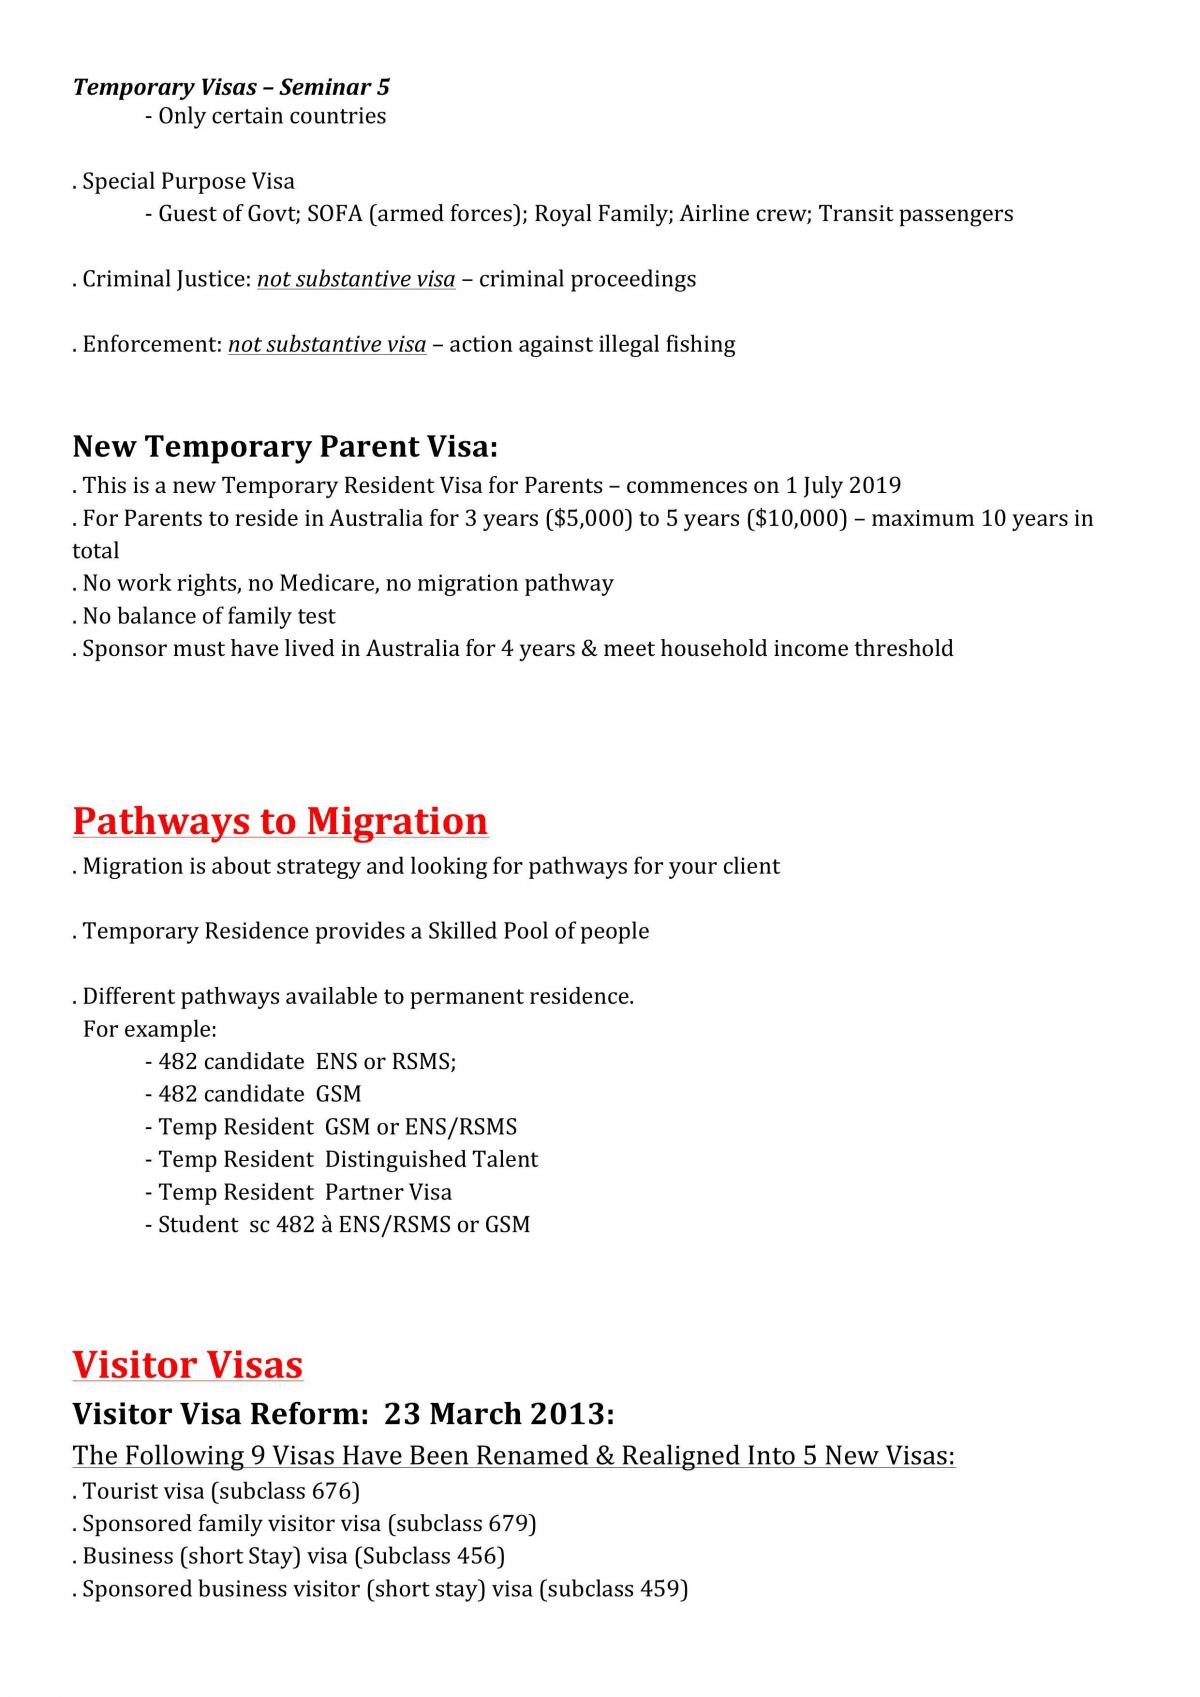 Immigration & Refugee Law Complete Study Notes - Page 76